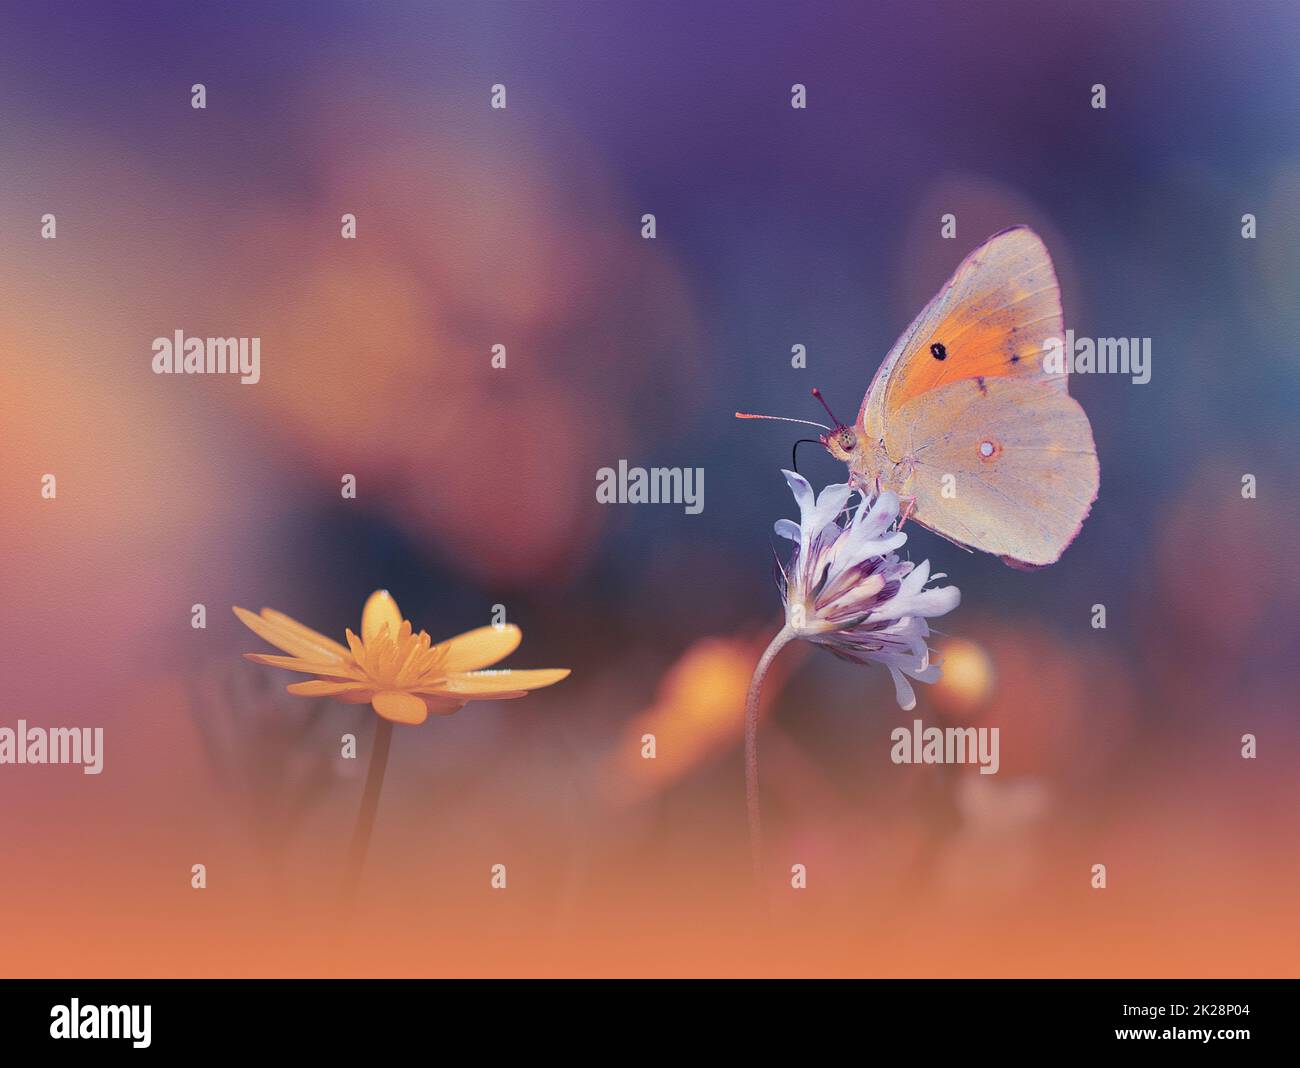 Beautiful Textured Nature Background.Floral Art Design.Macro Photography.Floral abstract pastel background with copy space.Butterfly and Floral Field.Butterfly in Summer Floral Background.Beautiful Butterfly on a Flower.Creative Artistic Wallpaper. Stock Photo